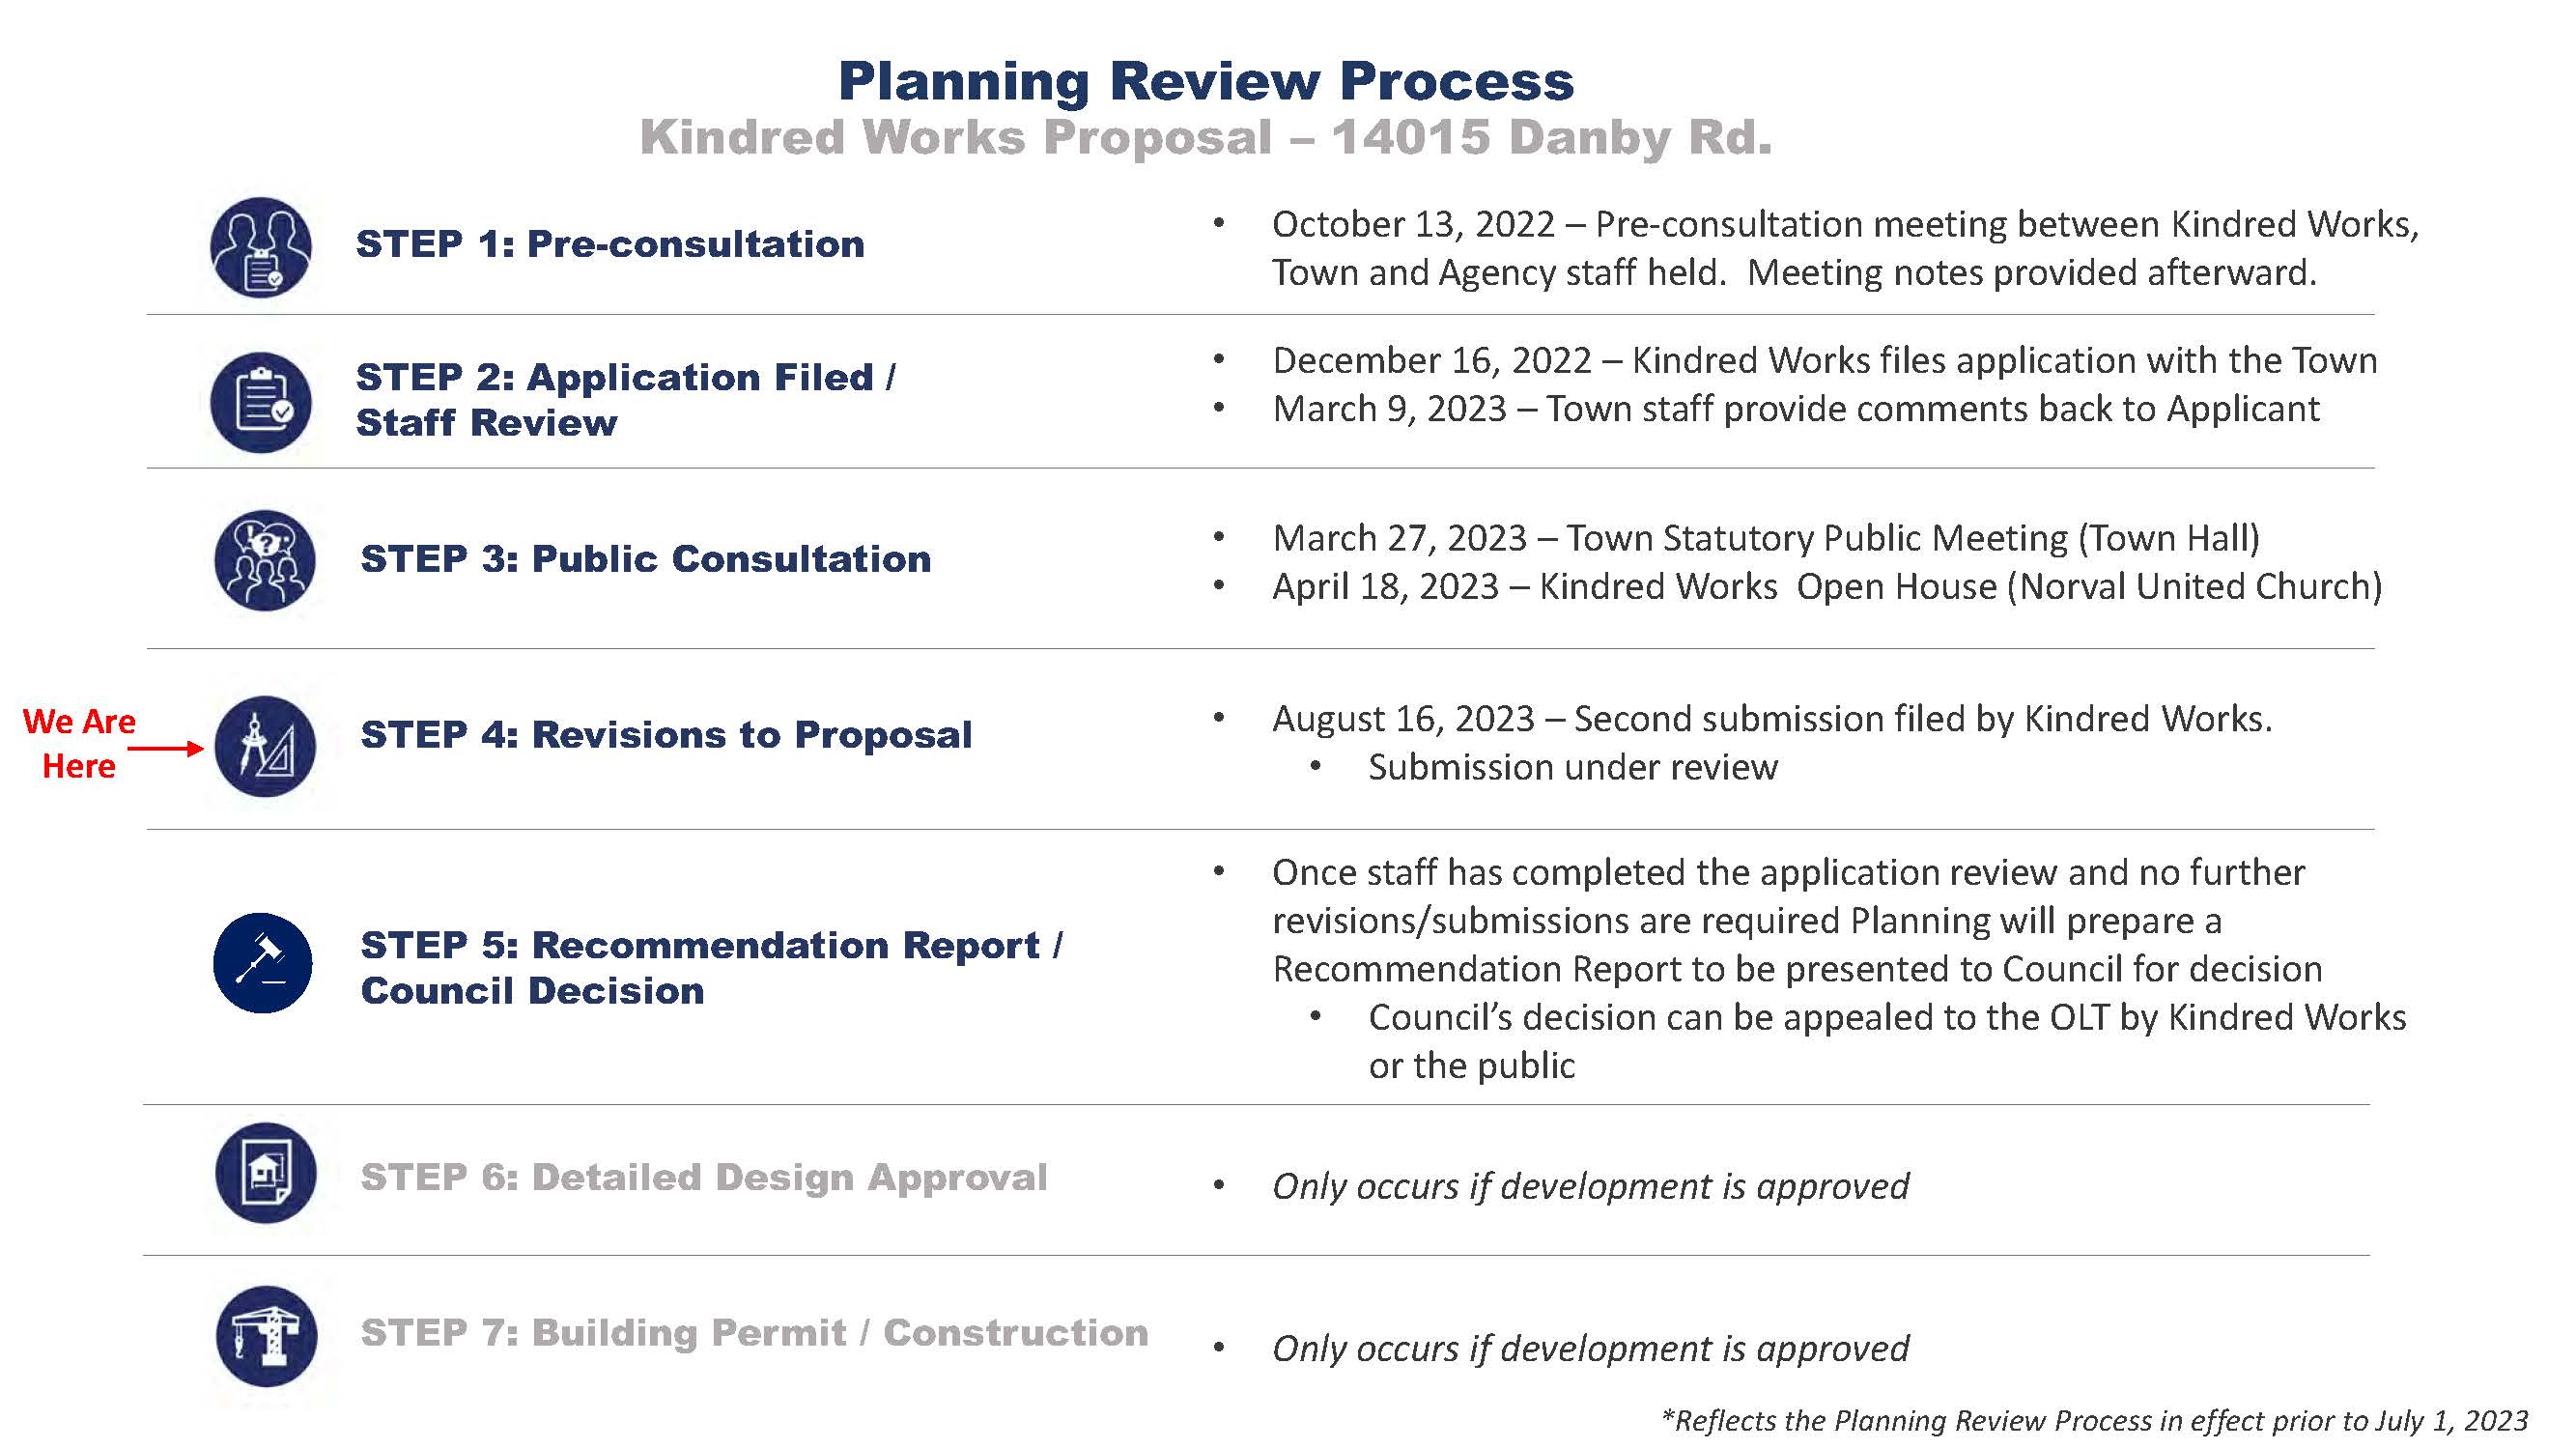 Planning Review Process - Norval United Church